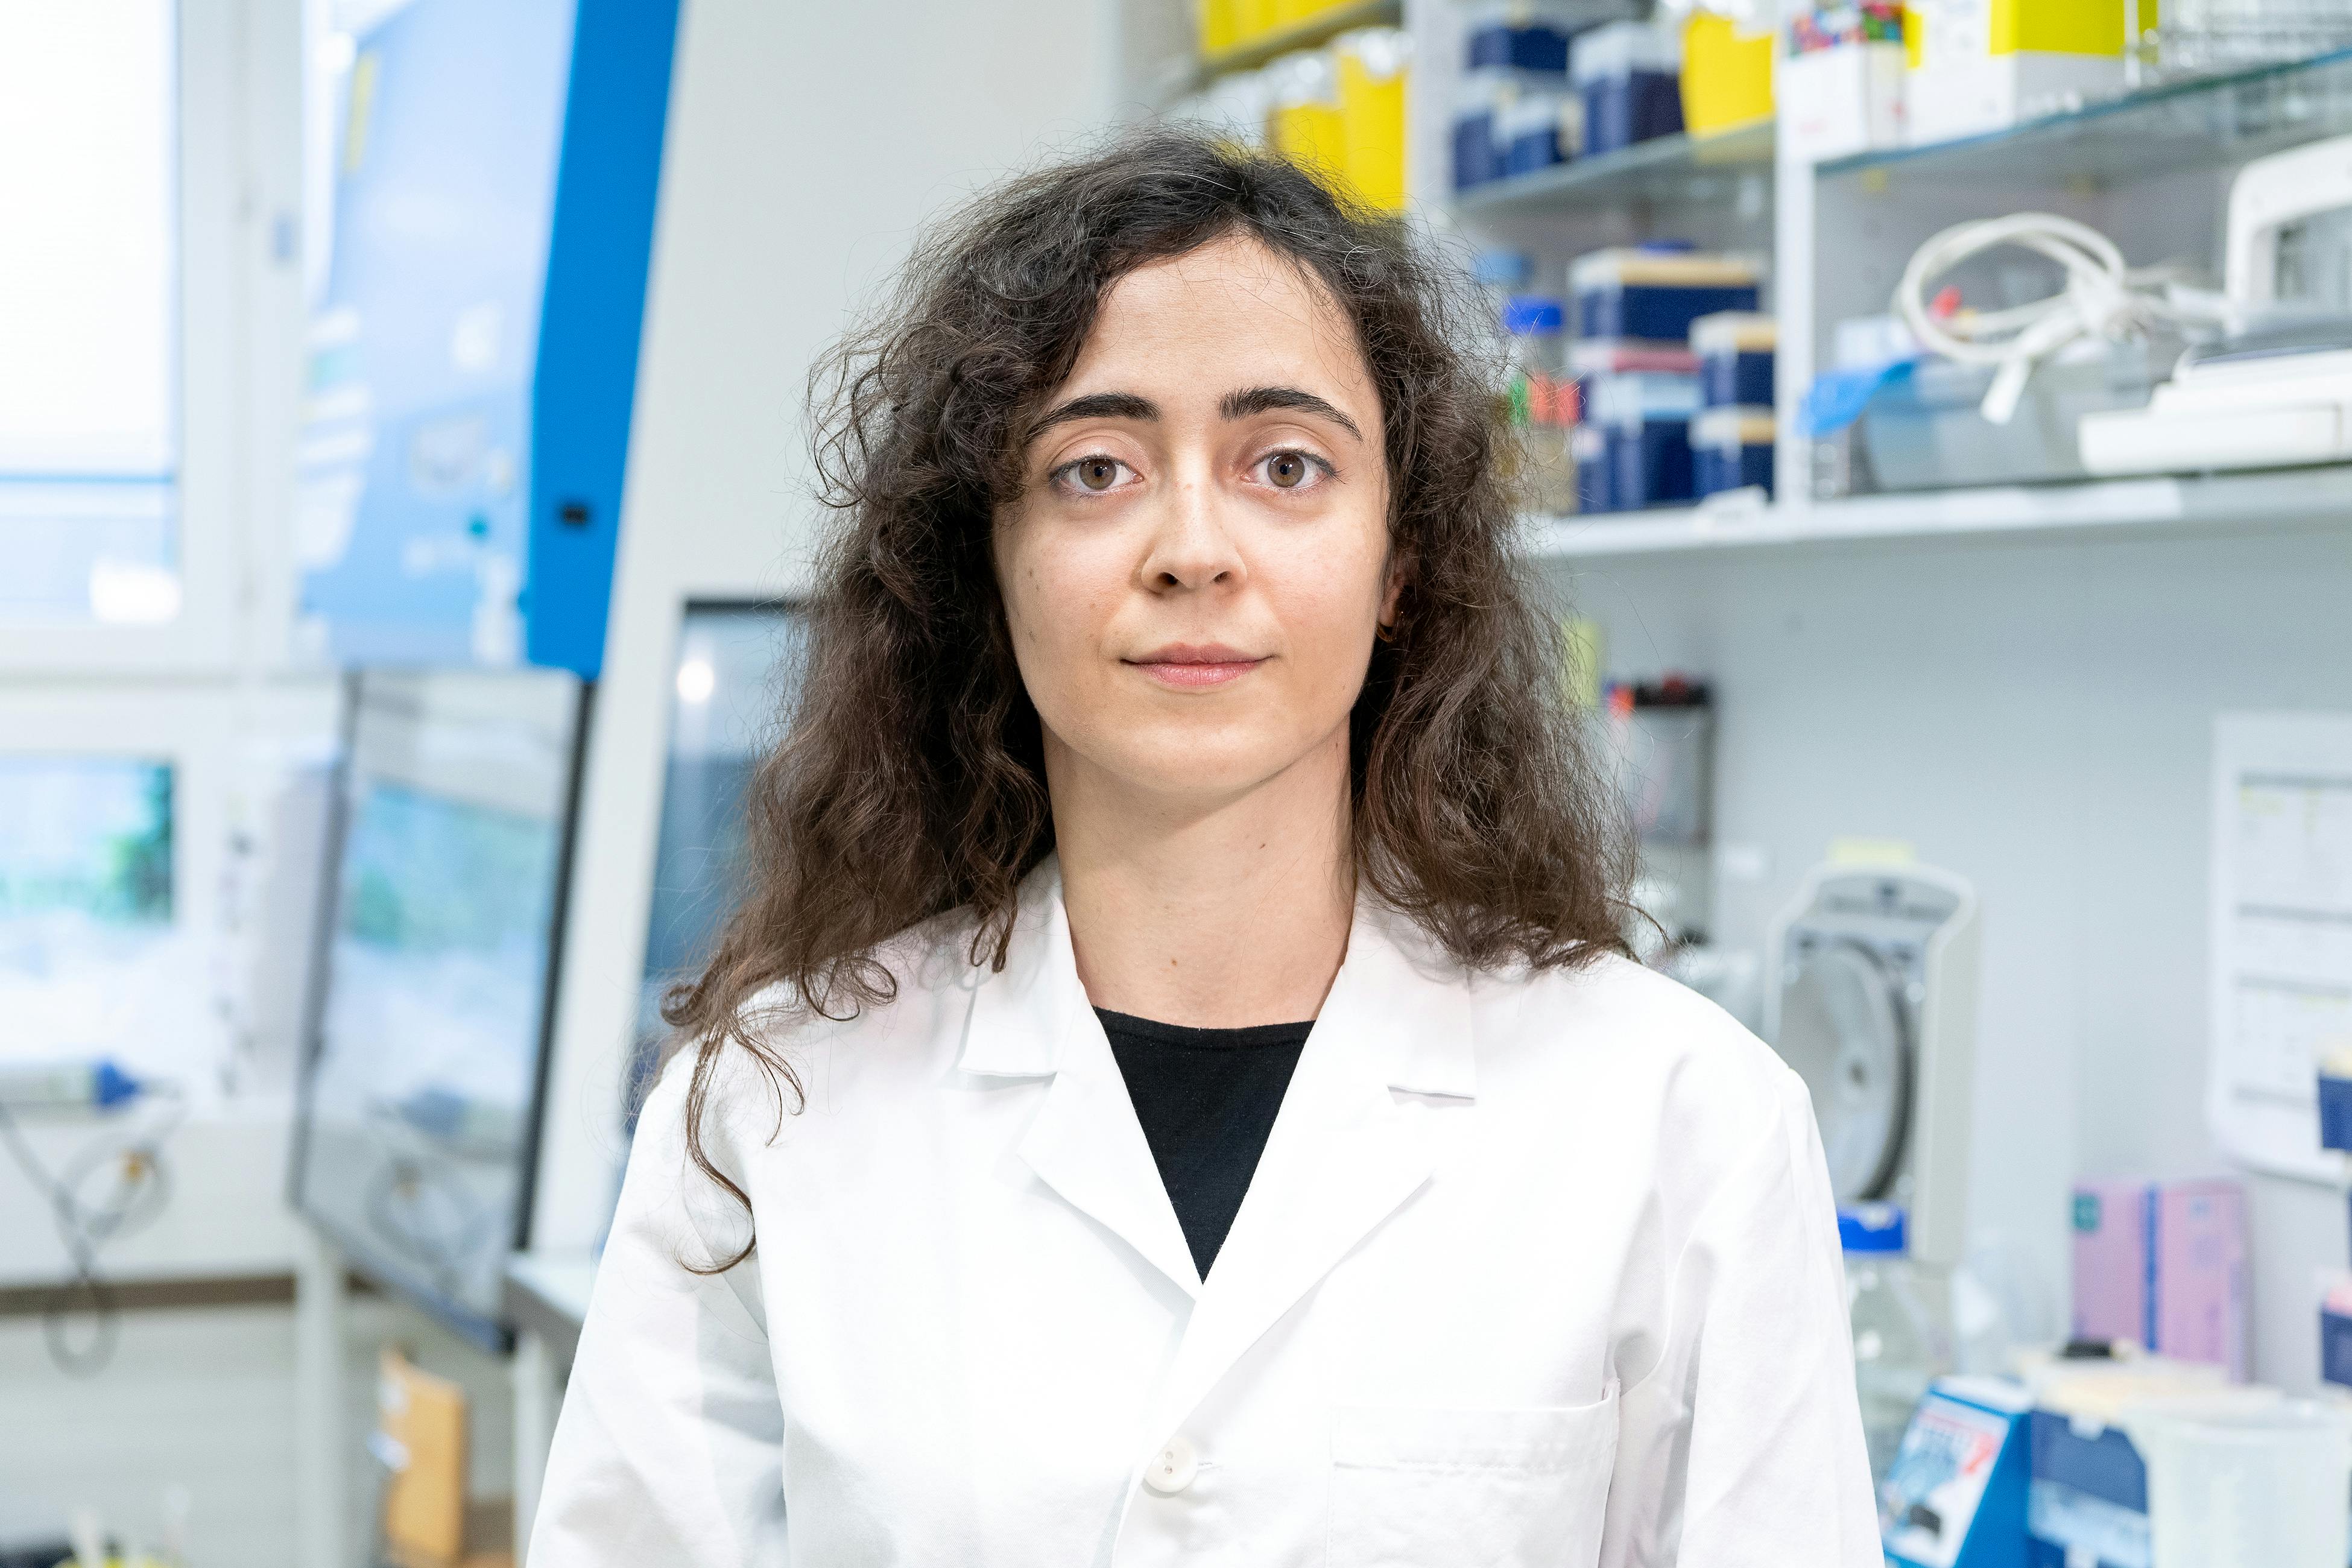 Dr. Alaz Özcan Özge is a postdoctoral researcher in the Department of Immunology at University Hospital Zurich and the University of Zurich.